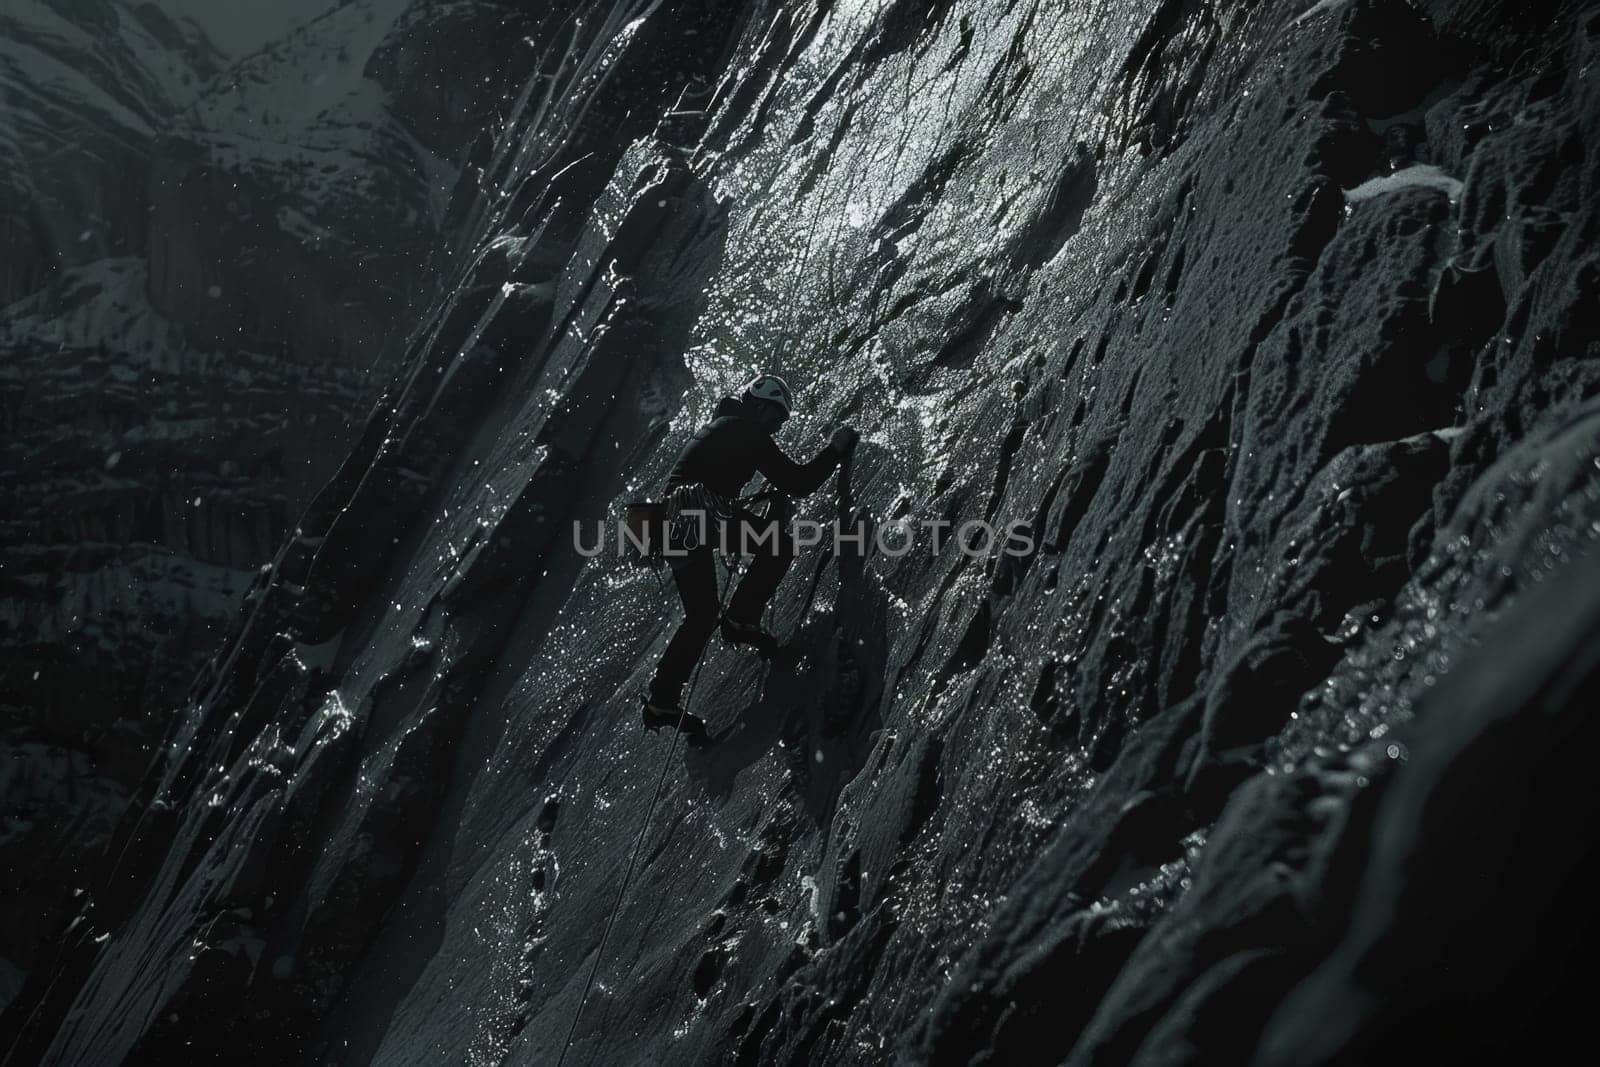 A monochromatic image of a climber using equipment to ascend a steep, icy mountain face